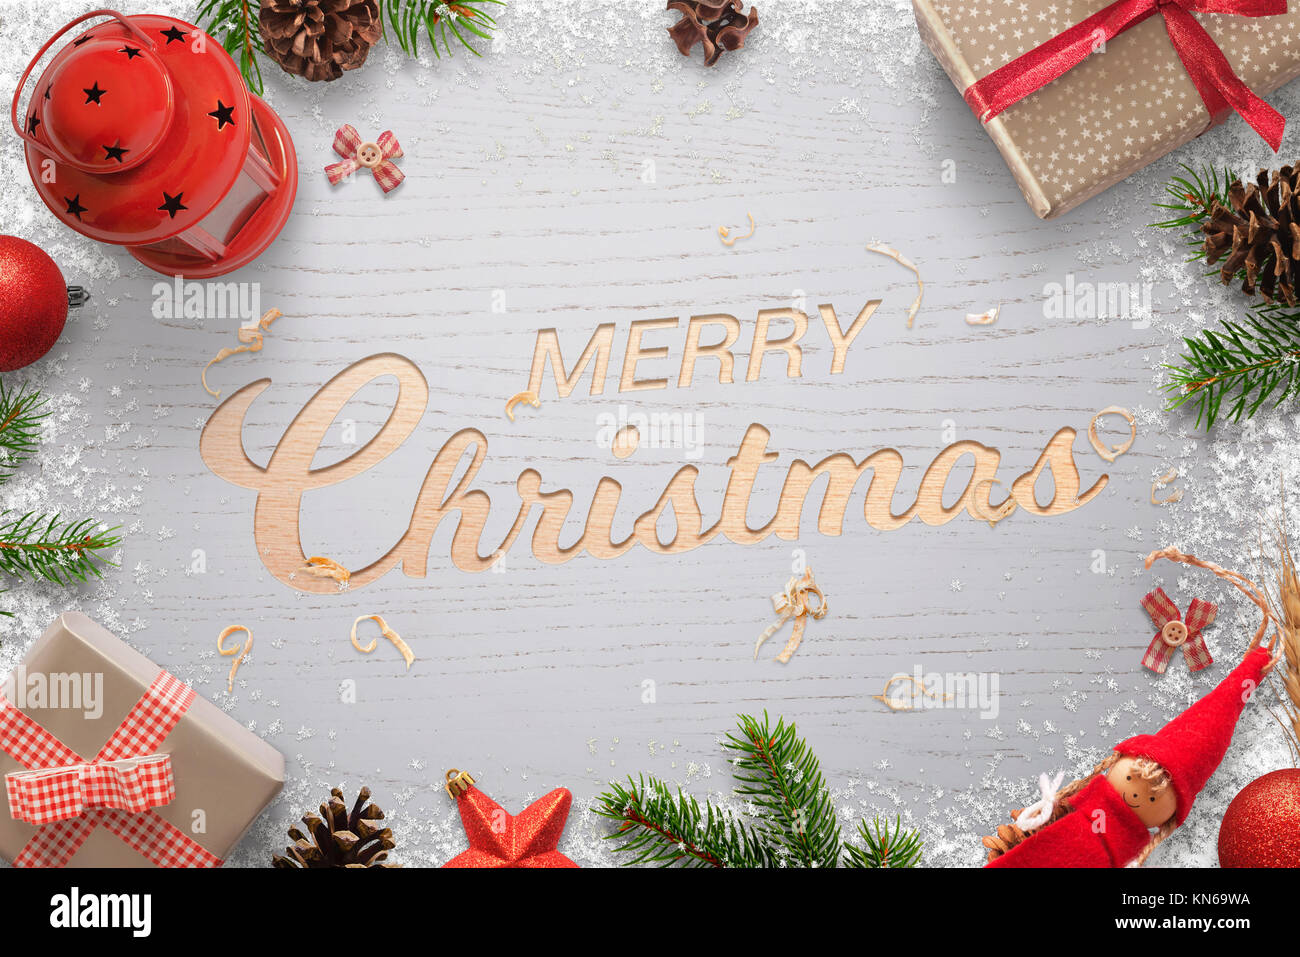 Merry Christmas text carved in a wooden surface and surrounded by Christmas decorations. Christmas tree, gifts, balls, lantern, pinecones and doll. Stock Photo